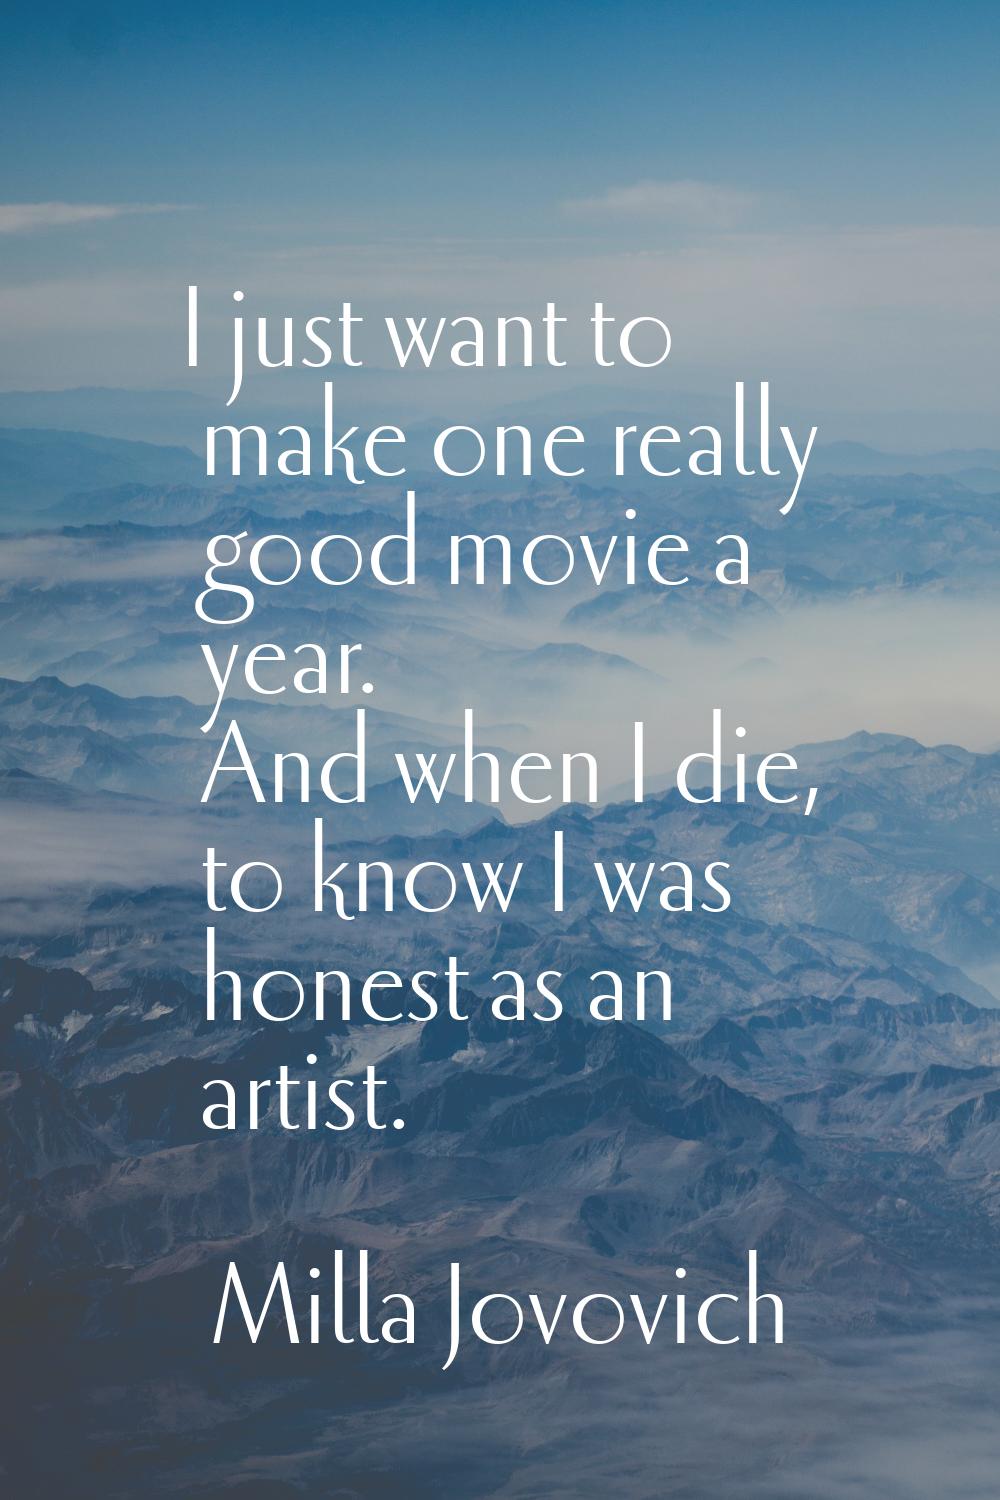 I just want to make one really good movie a year. And when I die, to know I was honest as an artist